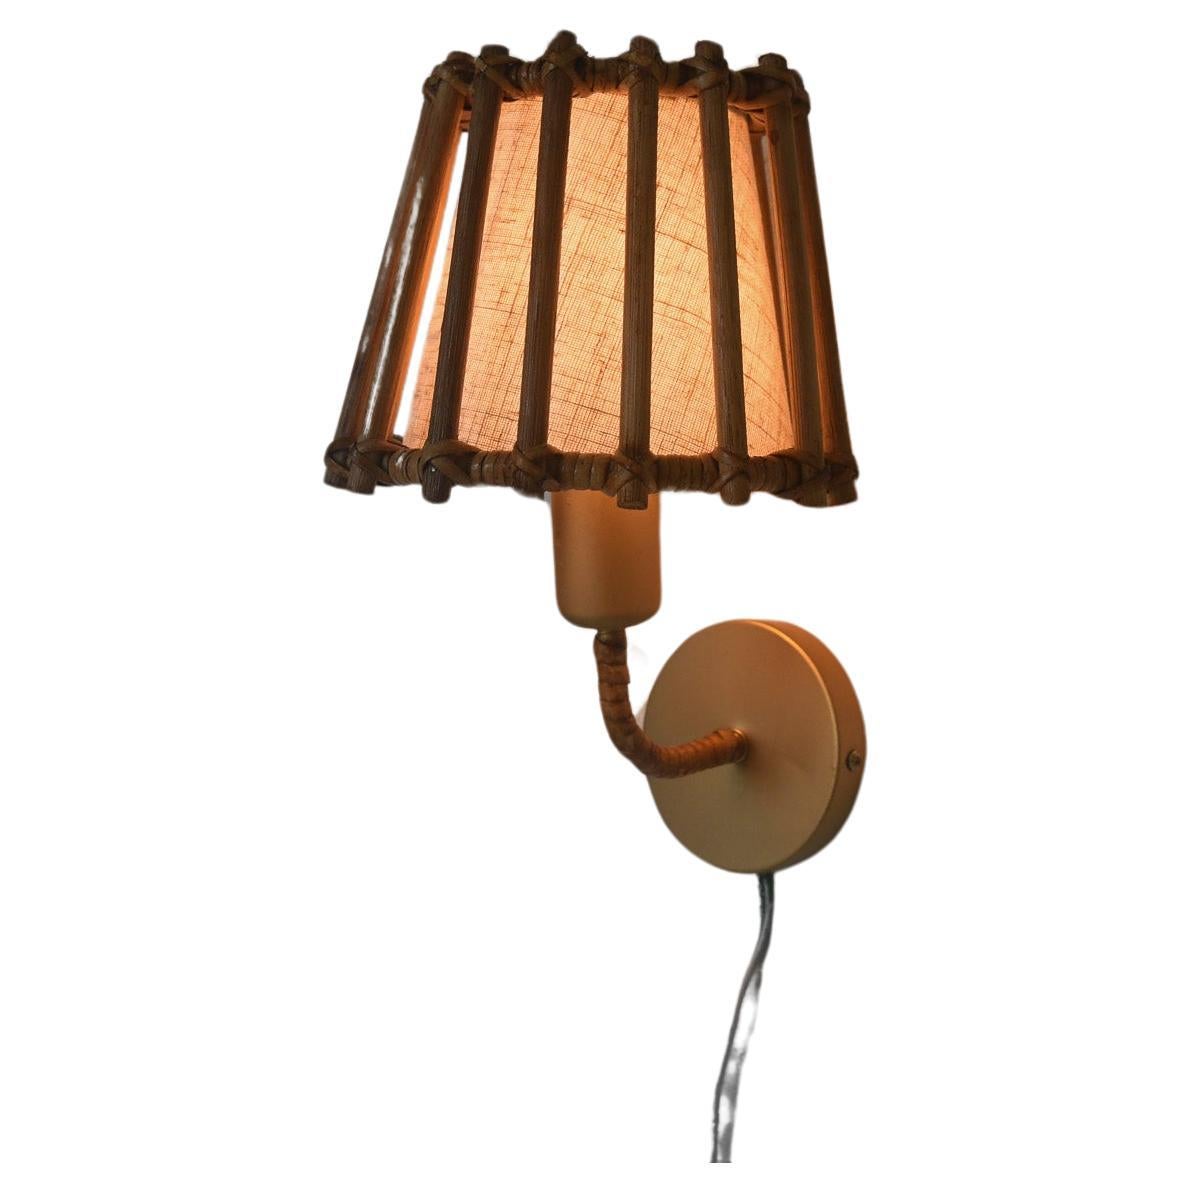 Mid century modern wall scones, This charming Organic rattan wall mounted sconce lamp is designed to bring a touch of mid-century French elegance to any room. Crafted from Rattan, with golden metal frame its distinctive rattan framed shade that